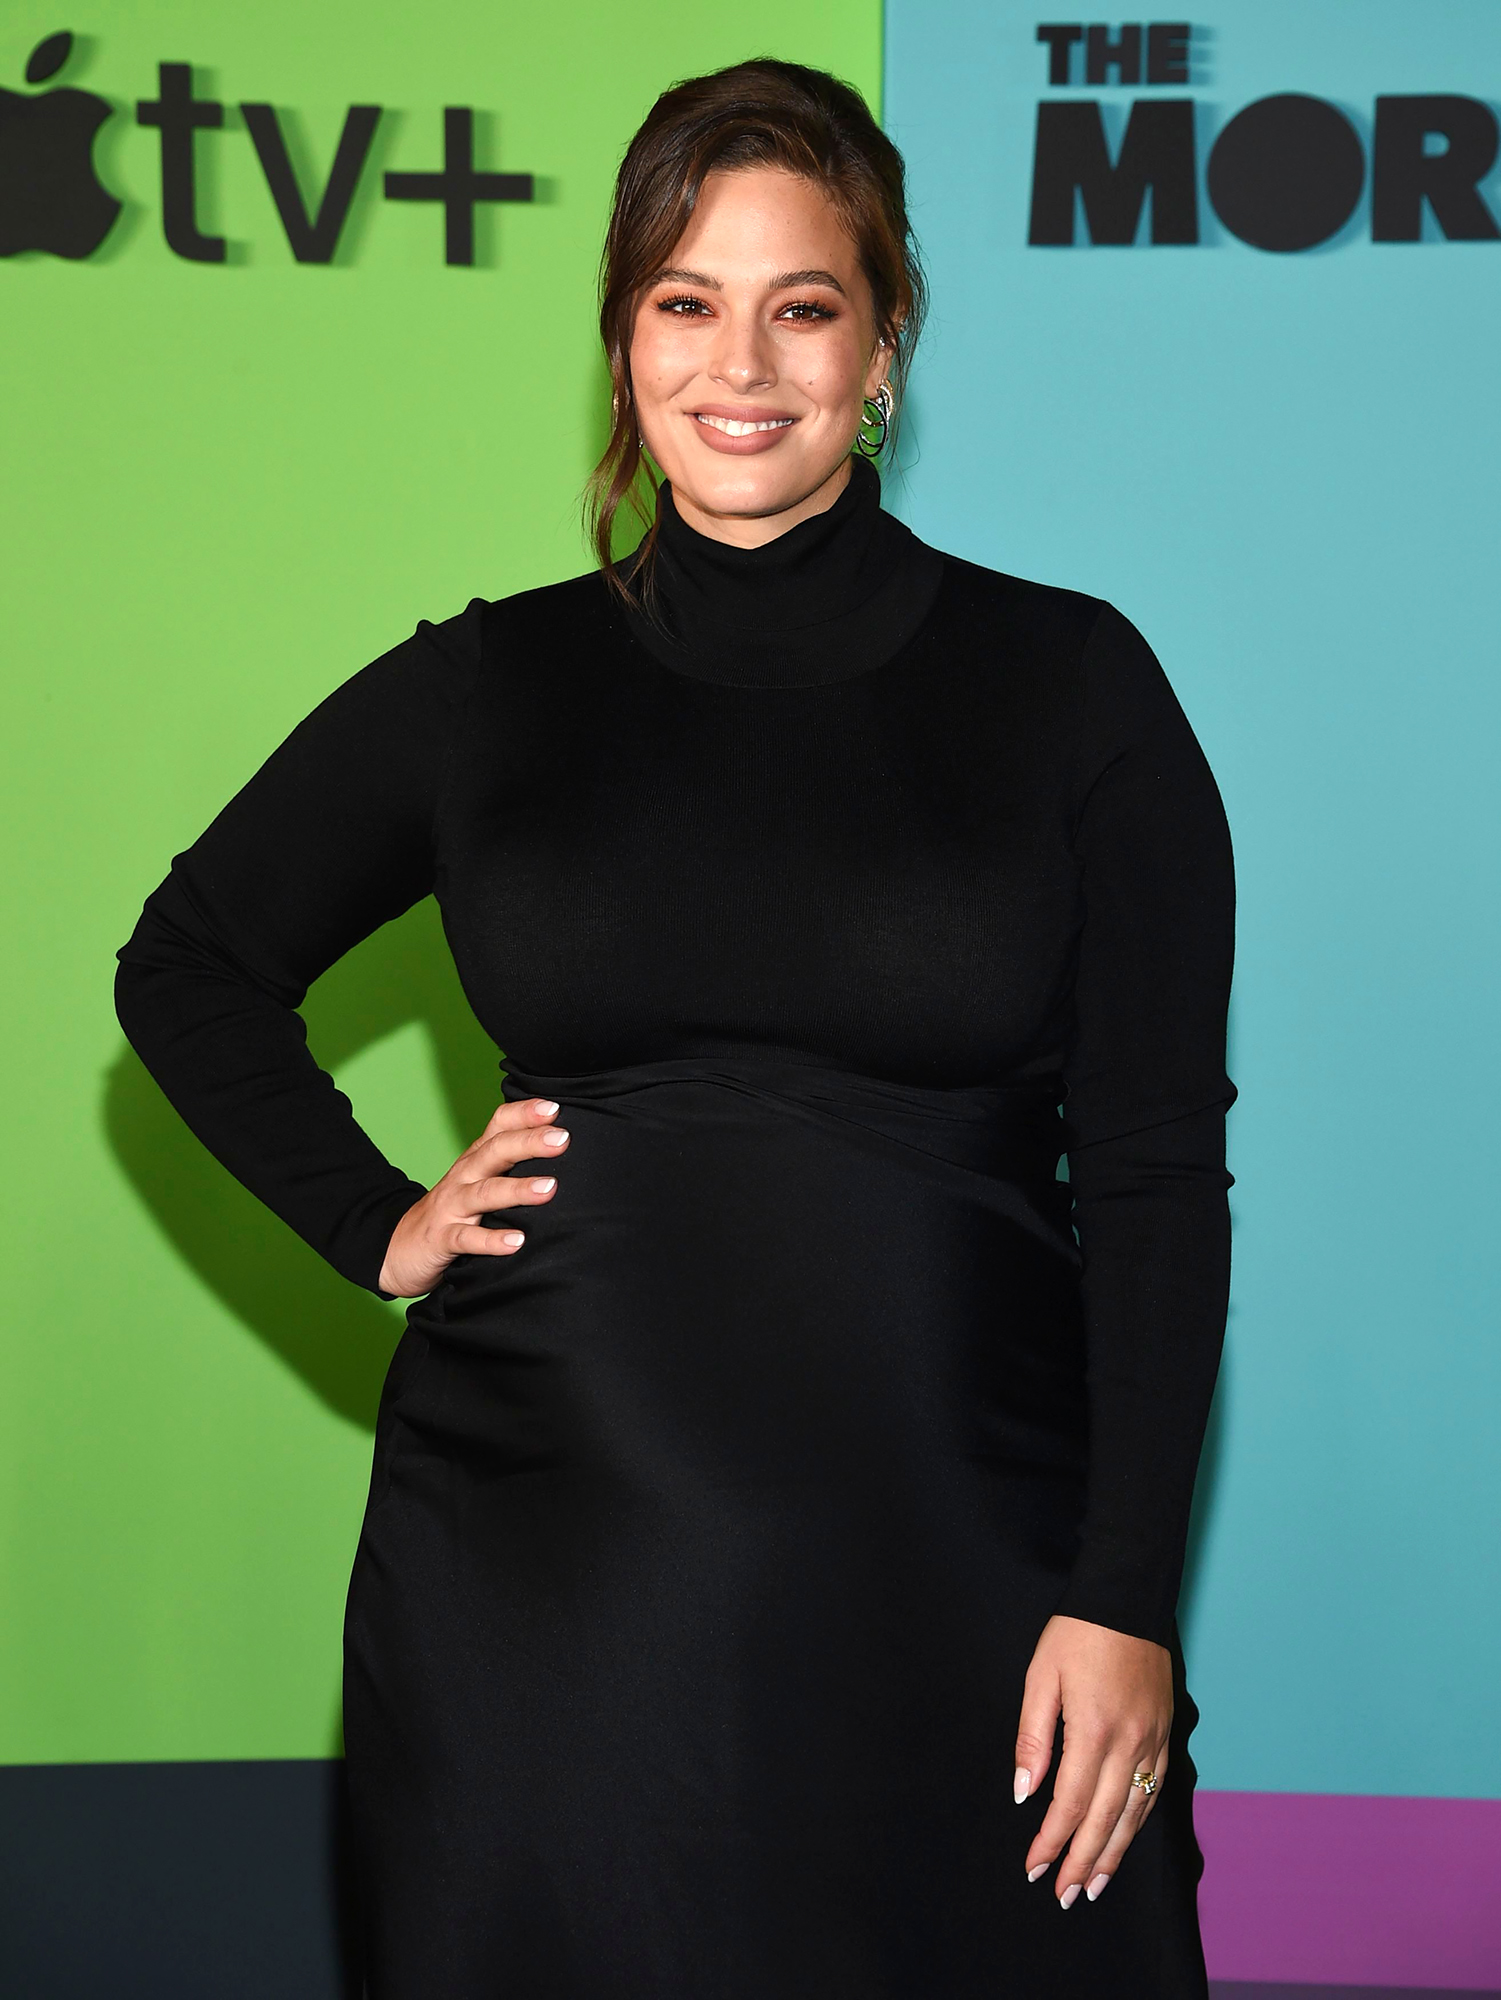 Pregnant Ashley Graham Shows Bare Bump In Cowgirl Inspired Maternity